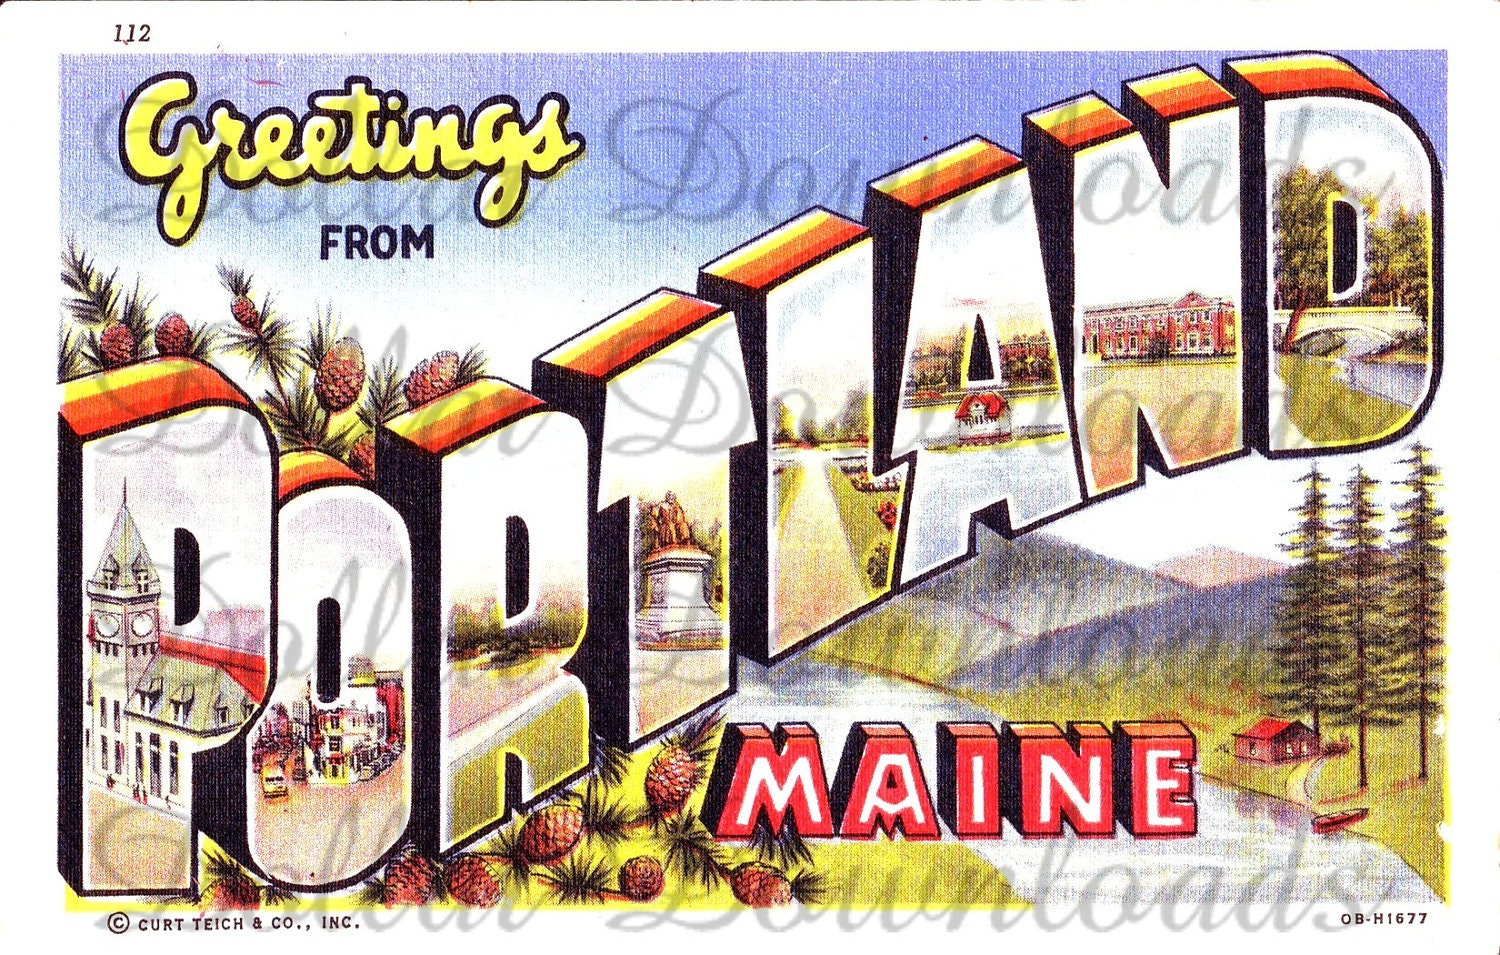 Greetings From Portland Maine Large Letter Antique Postcard Digital Image Download No. 15225 Buy 3 Images and get 2 Free